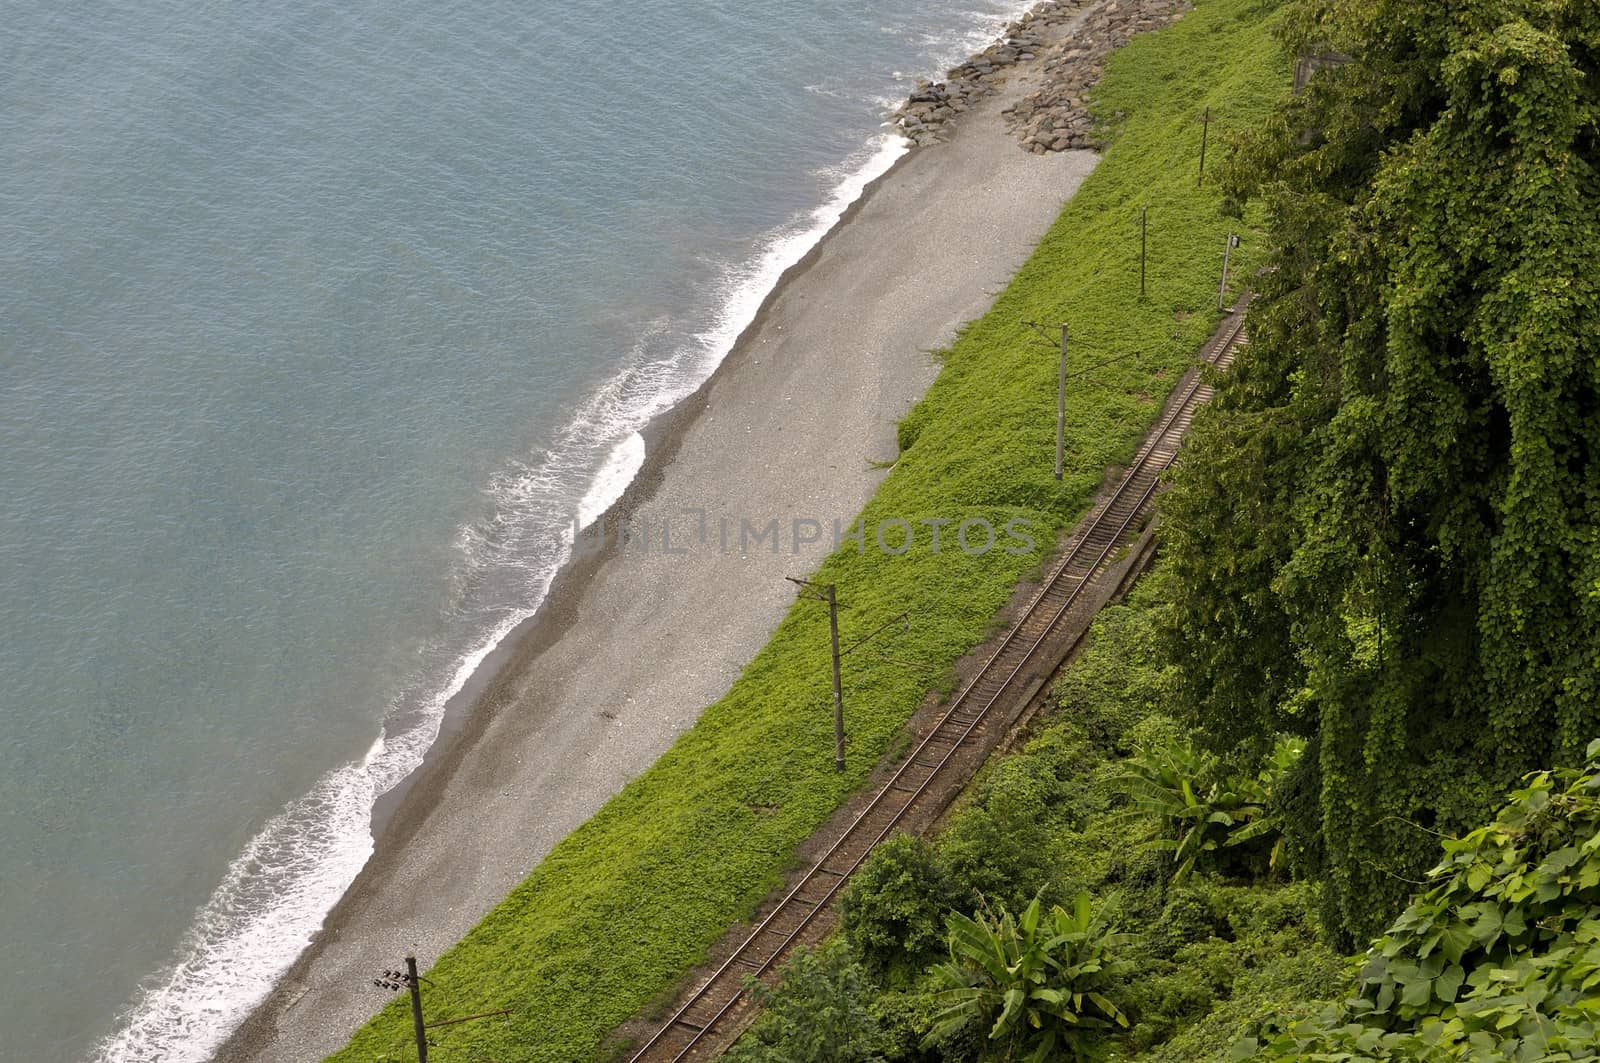 view of the railway on the beach